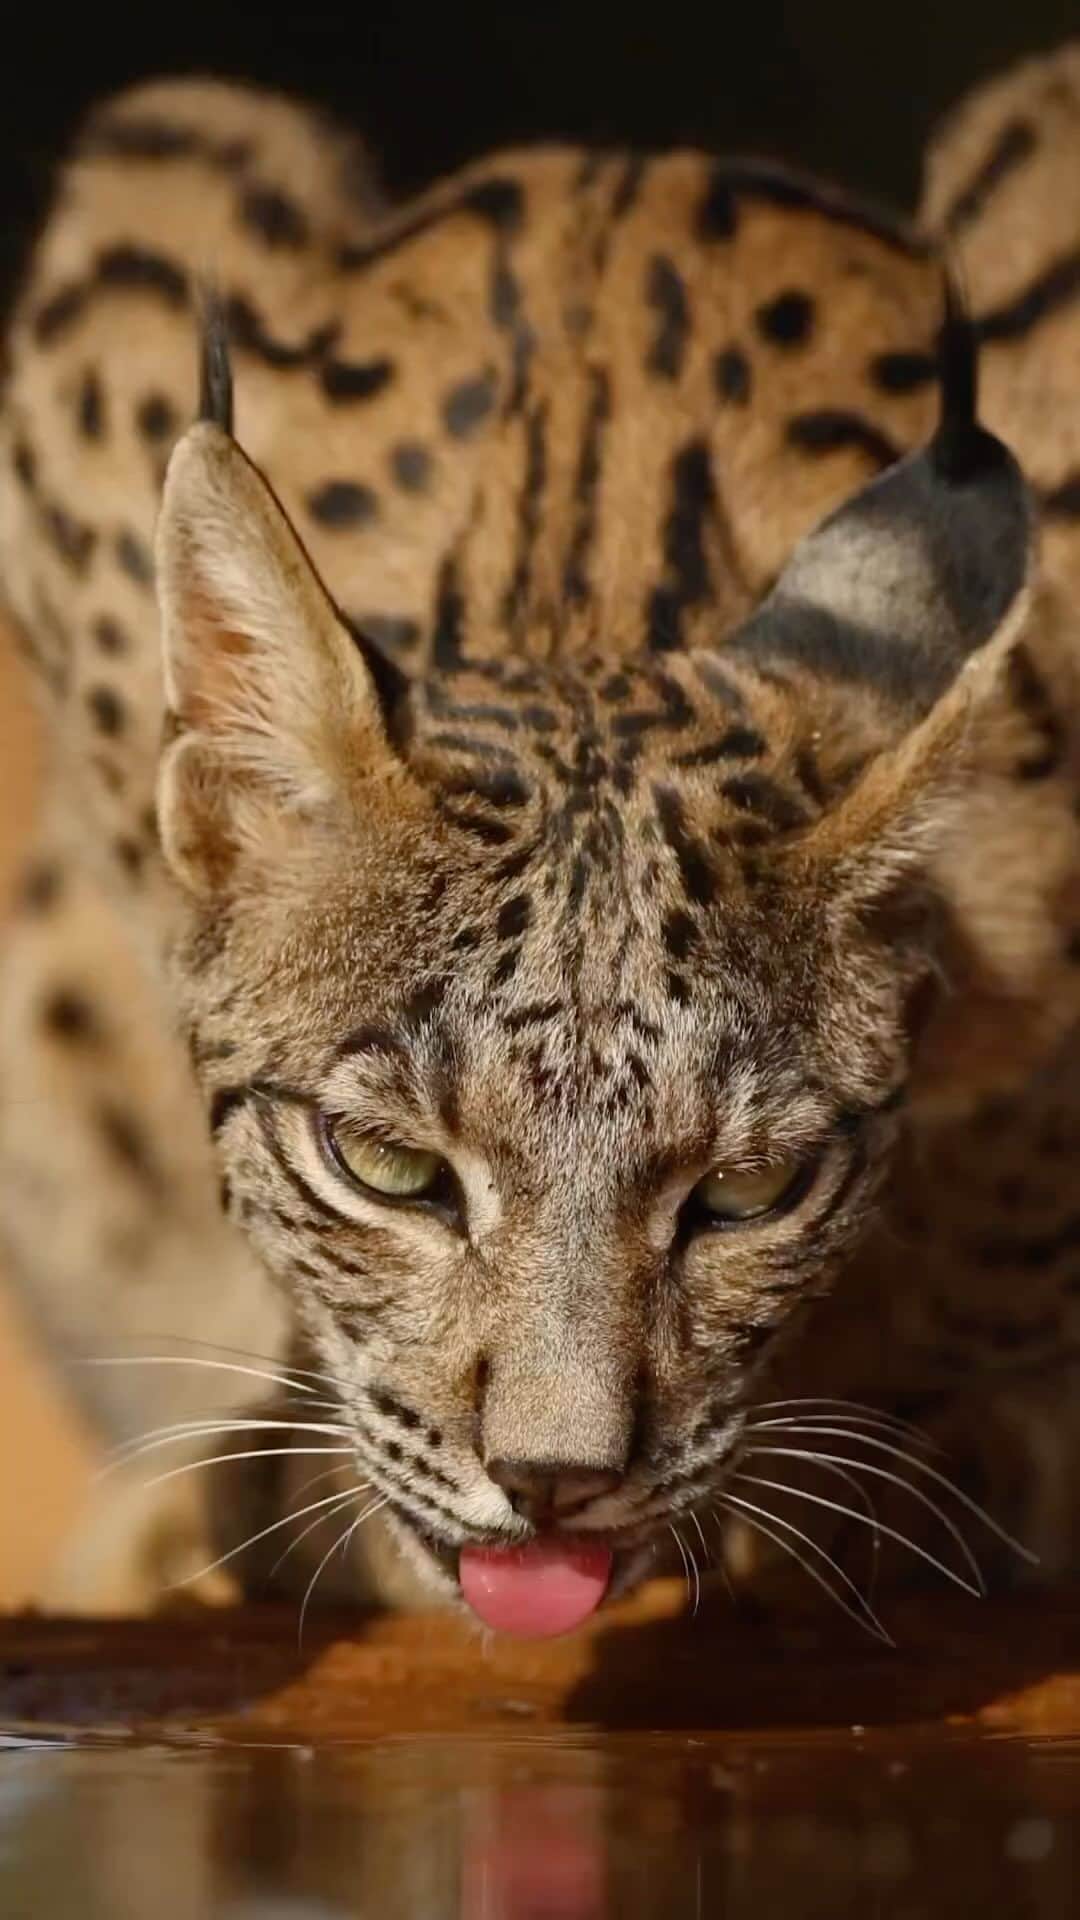 Awesome Wonderful Natureのインスタグラム：「The Iberian lynx.¹ 🎥 by @julian_terrerosmartin  Julian Terreros-Martin: “One of the rarest cats in the world, the Iberian lynx. Growing up, I thought I would never have the chance to see this incredible species alive, and at the age of 6, there were only 94 individuals alive. Luckily, since then, their numbers have only grown, and I have had the privilege to see and photograph these amazing animals on several occasions over the last 4 years. I always try to remember how lucky I am to be able to see these animals, and it will never get old seeing a lynx in the wild. This moment left me speechless and couldn’t have been a better start to my Iberian lynx tour. I’m sure my clients will cherish this memory for the rest of their lives.”  . #amazinganimals #animalonplanet #everything_animals #wildlifephotos #animallove #bbcearth #animal_sultans #wildlifeart #exclusive_wildlife #nature #animals #wildlifeonearth #animal  #animalsofig #photo #animalfanatics #world_bestanimal #animals_in_world #animalelite #newborn #babyanimals #conservation #earthfocus #travelstoke #beautifuldestinations #naturelovers」